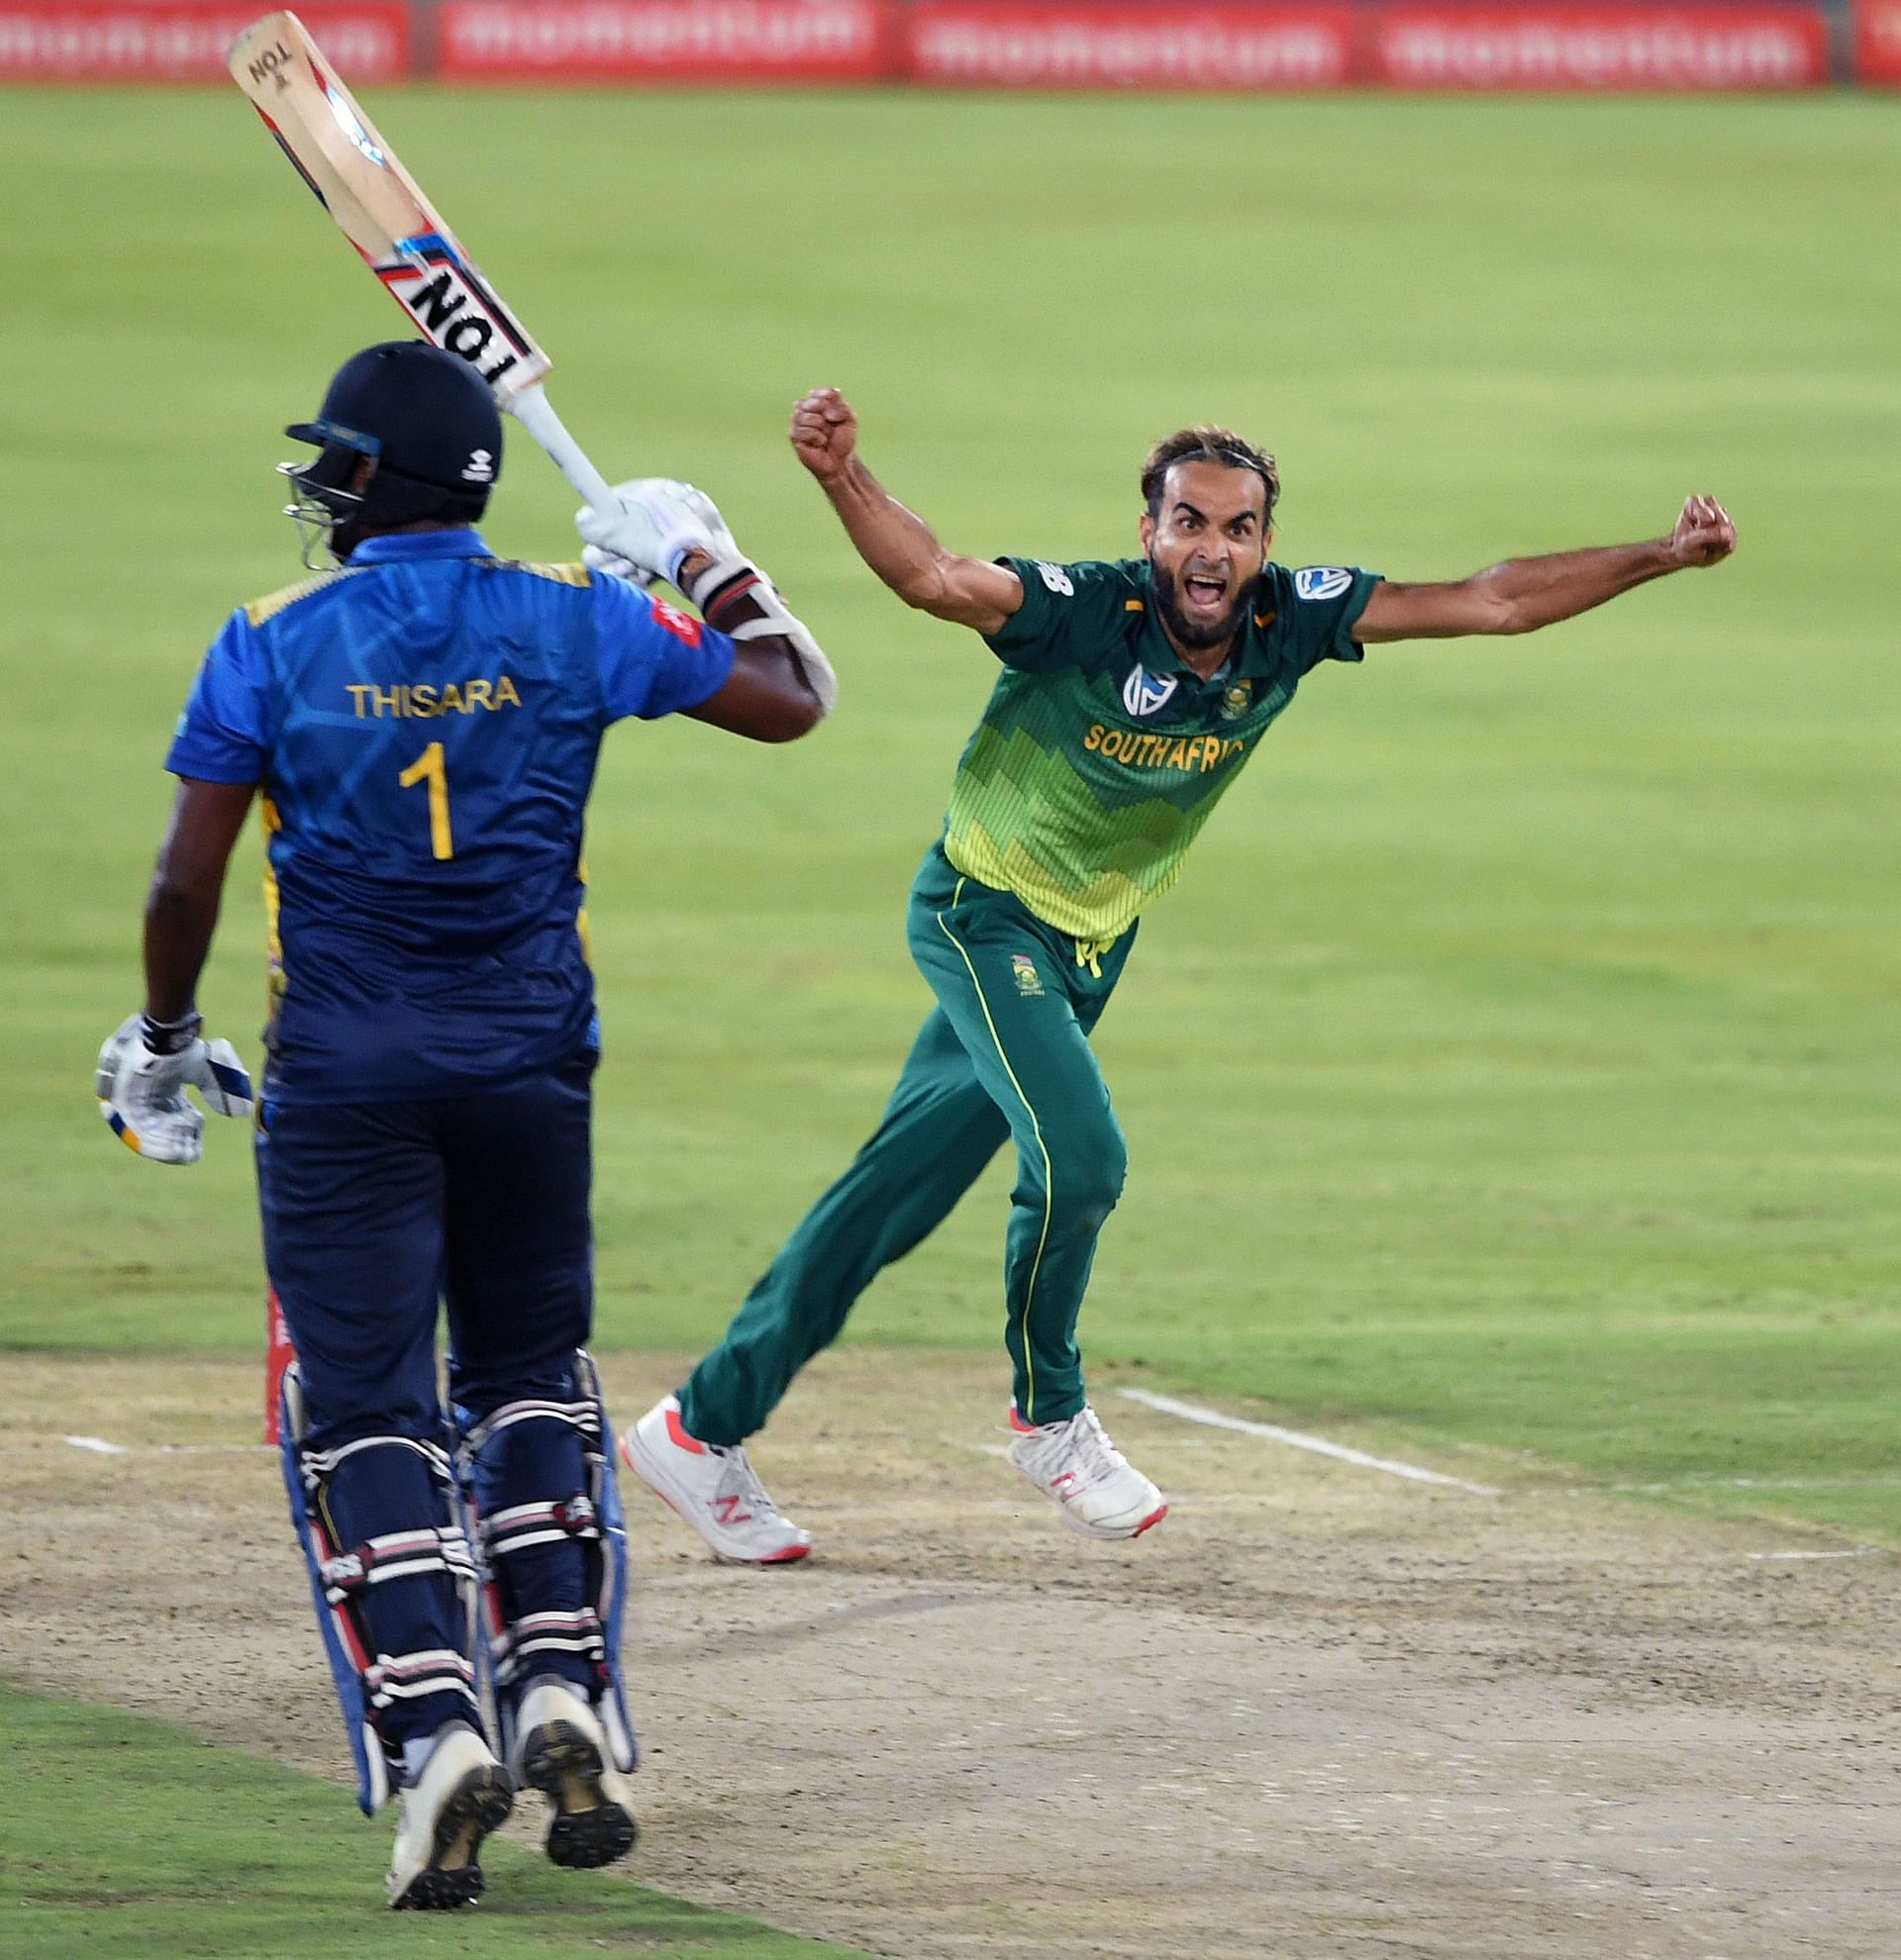 Tahir out-skilled Perera in the super-over to win South Africa the game.